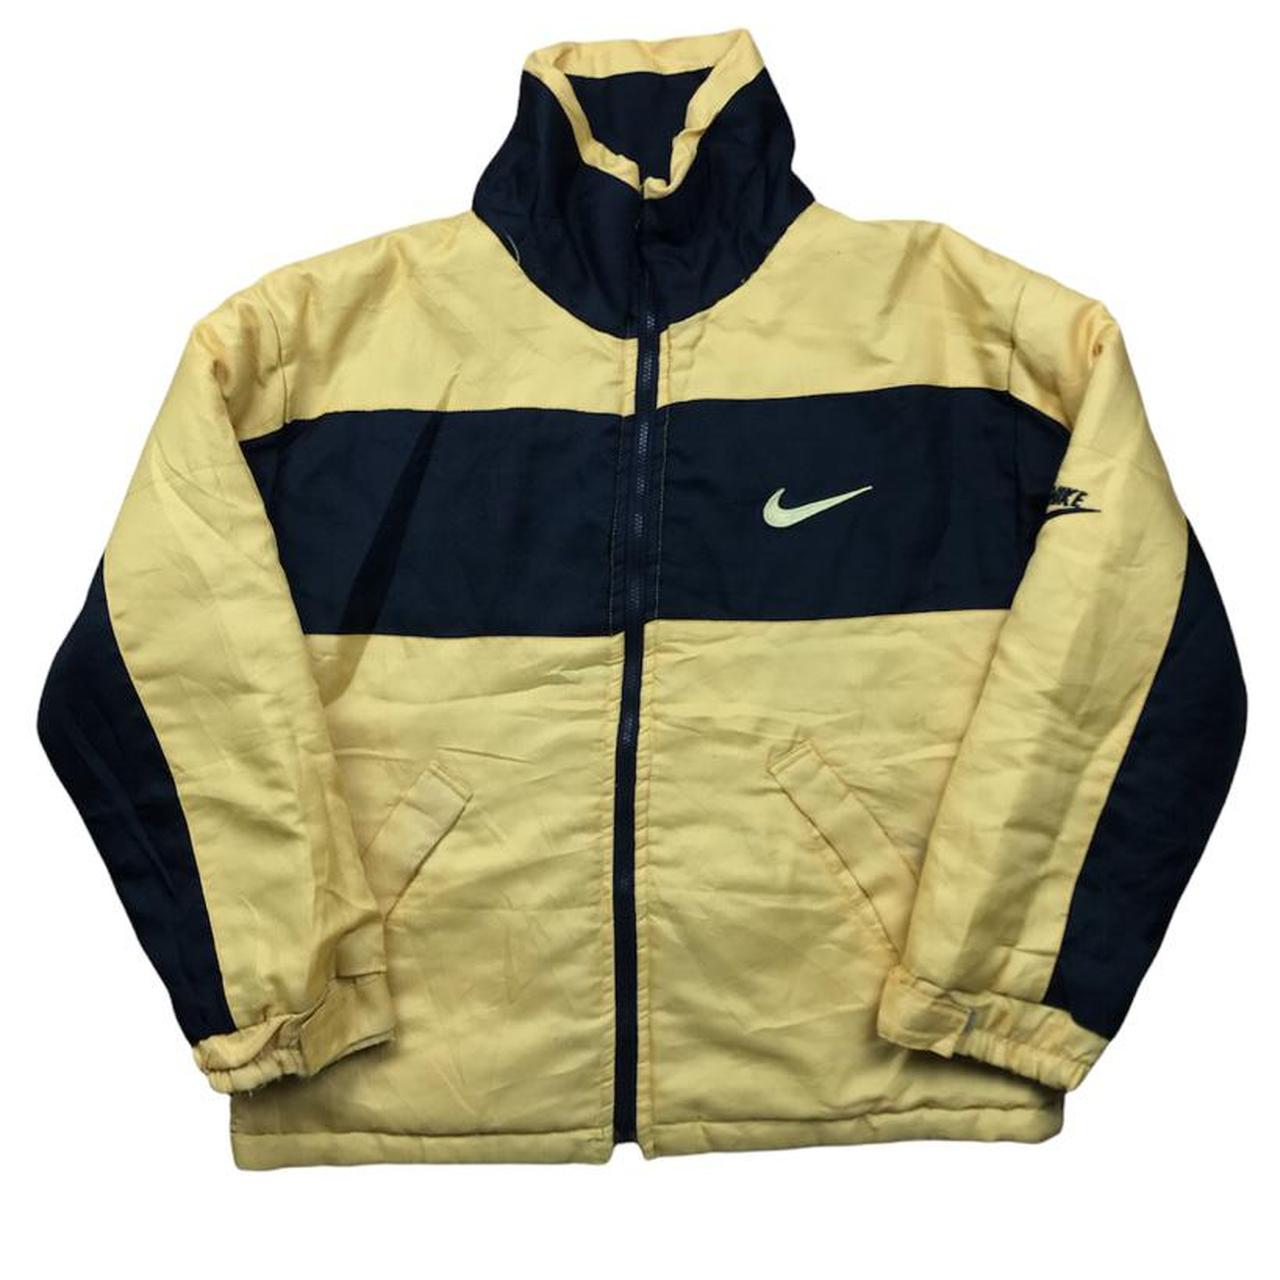 Nike Padded Jacket in Yellow and Black with big... - Depop